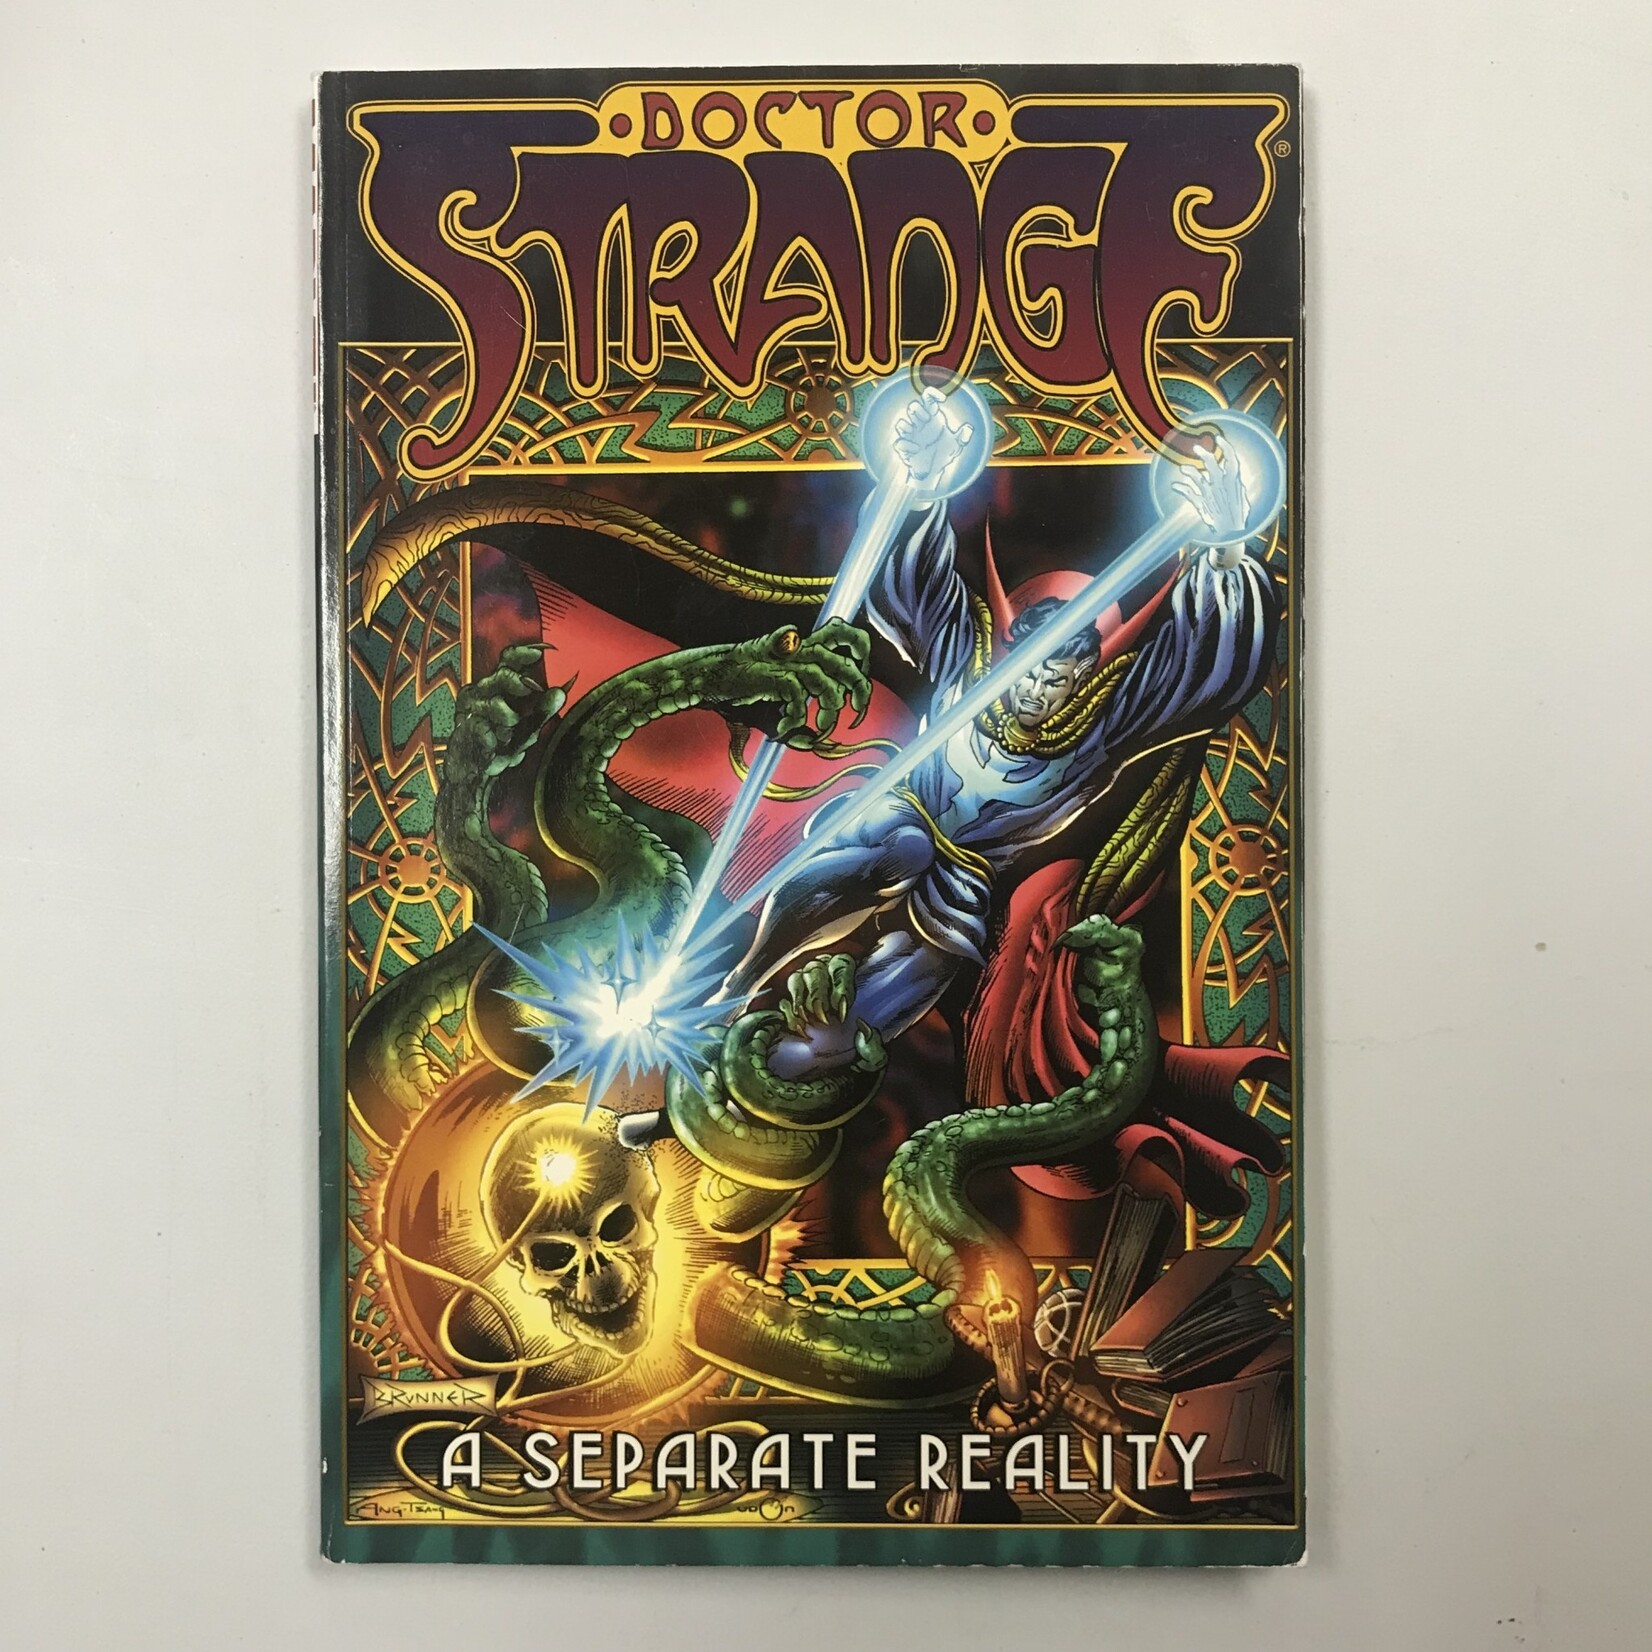 Dr. Strange - A Separate Reality - Paperback (USED)